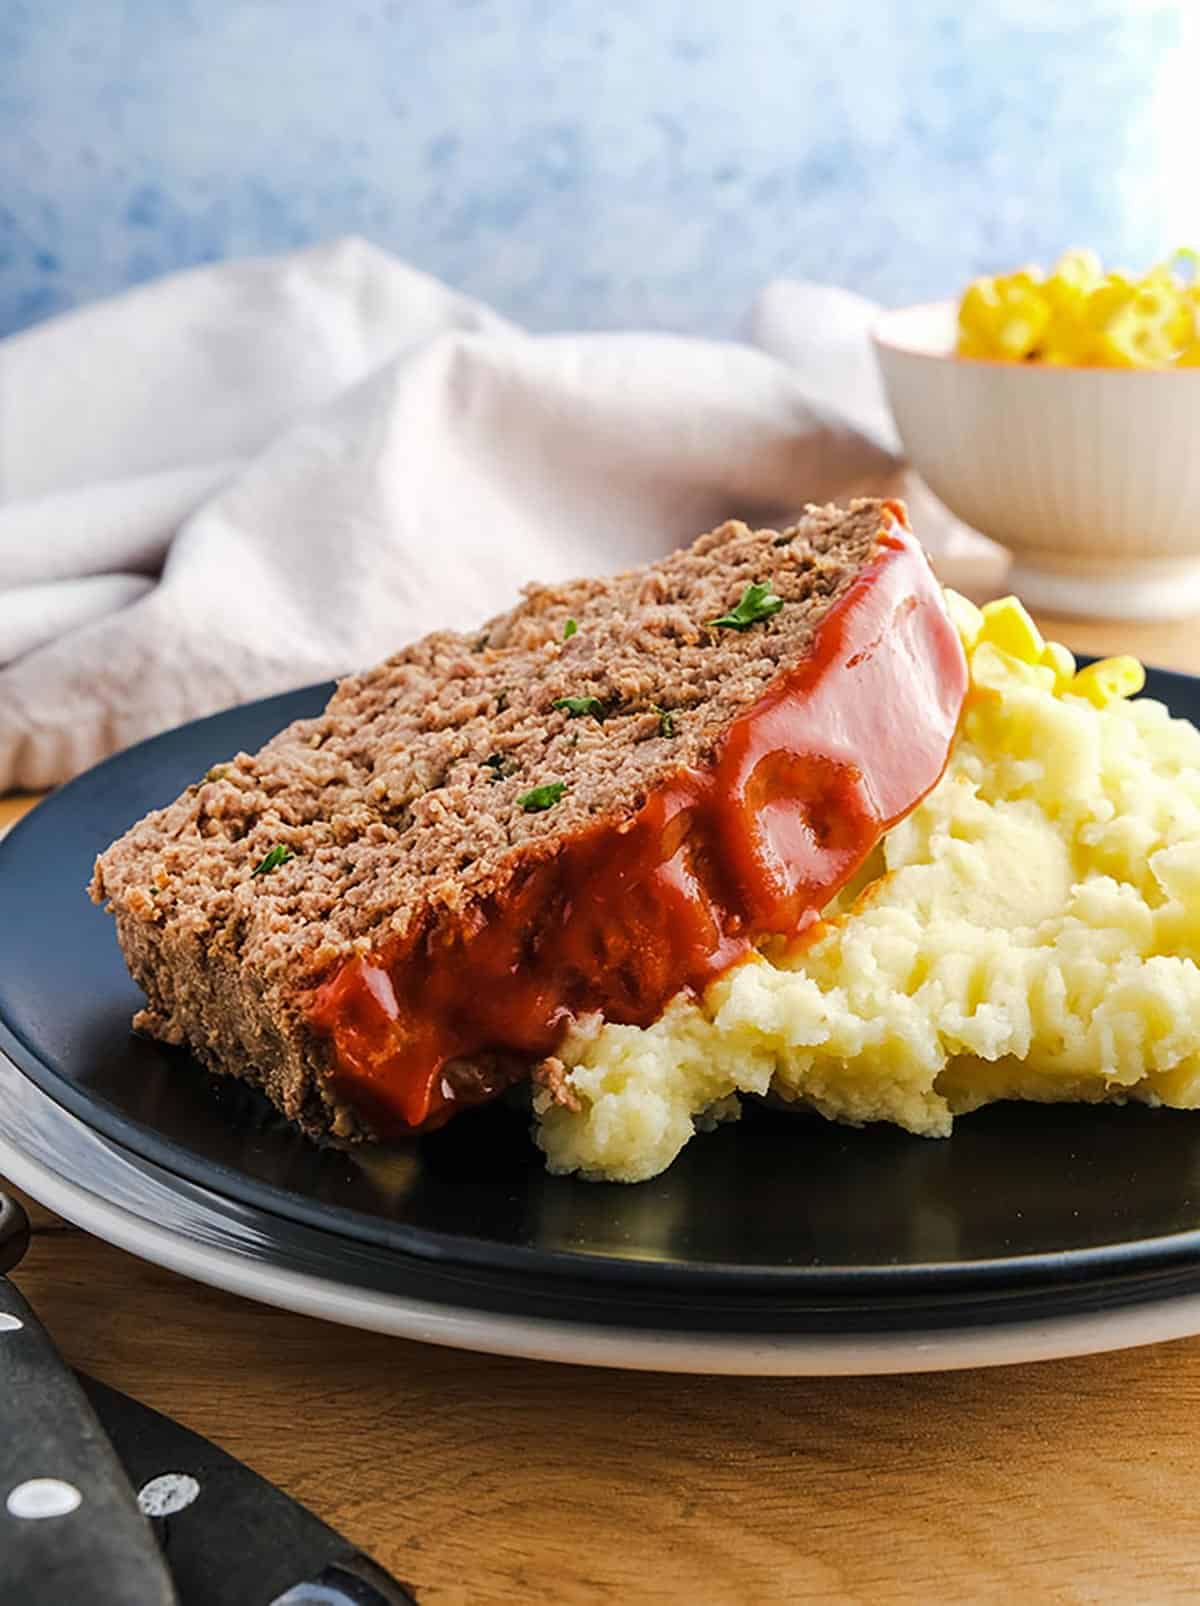 Homemade Delicious Meatloaf with Mashed Potatoes